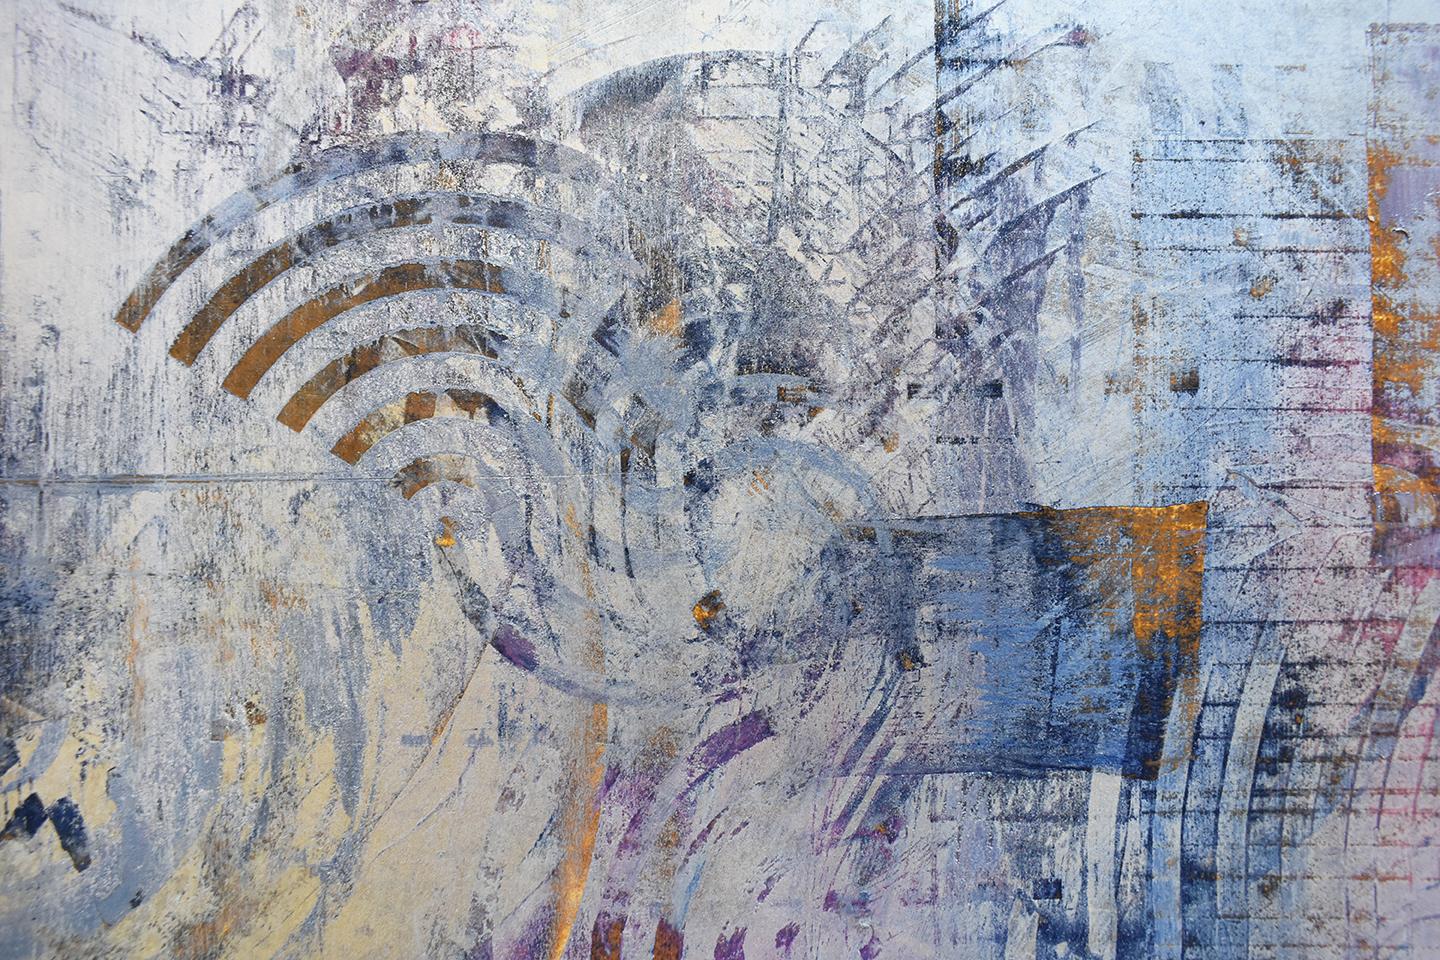 A Wind Behind the Cloud (Abstract Expressionist Painting in Blue, Gold & Gray) 4